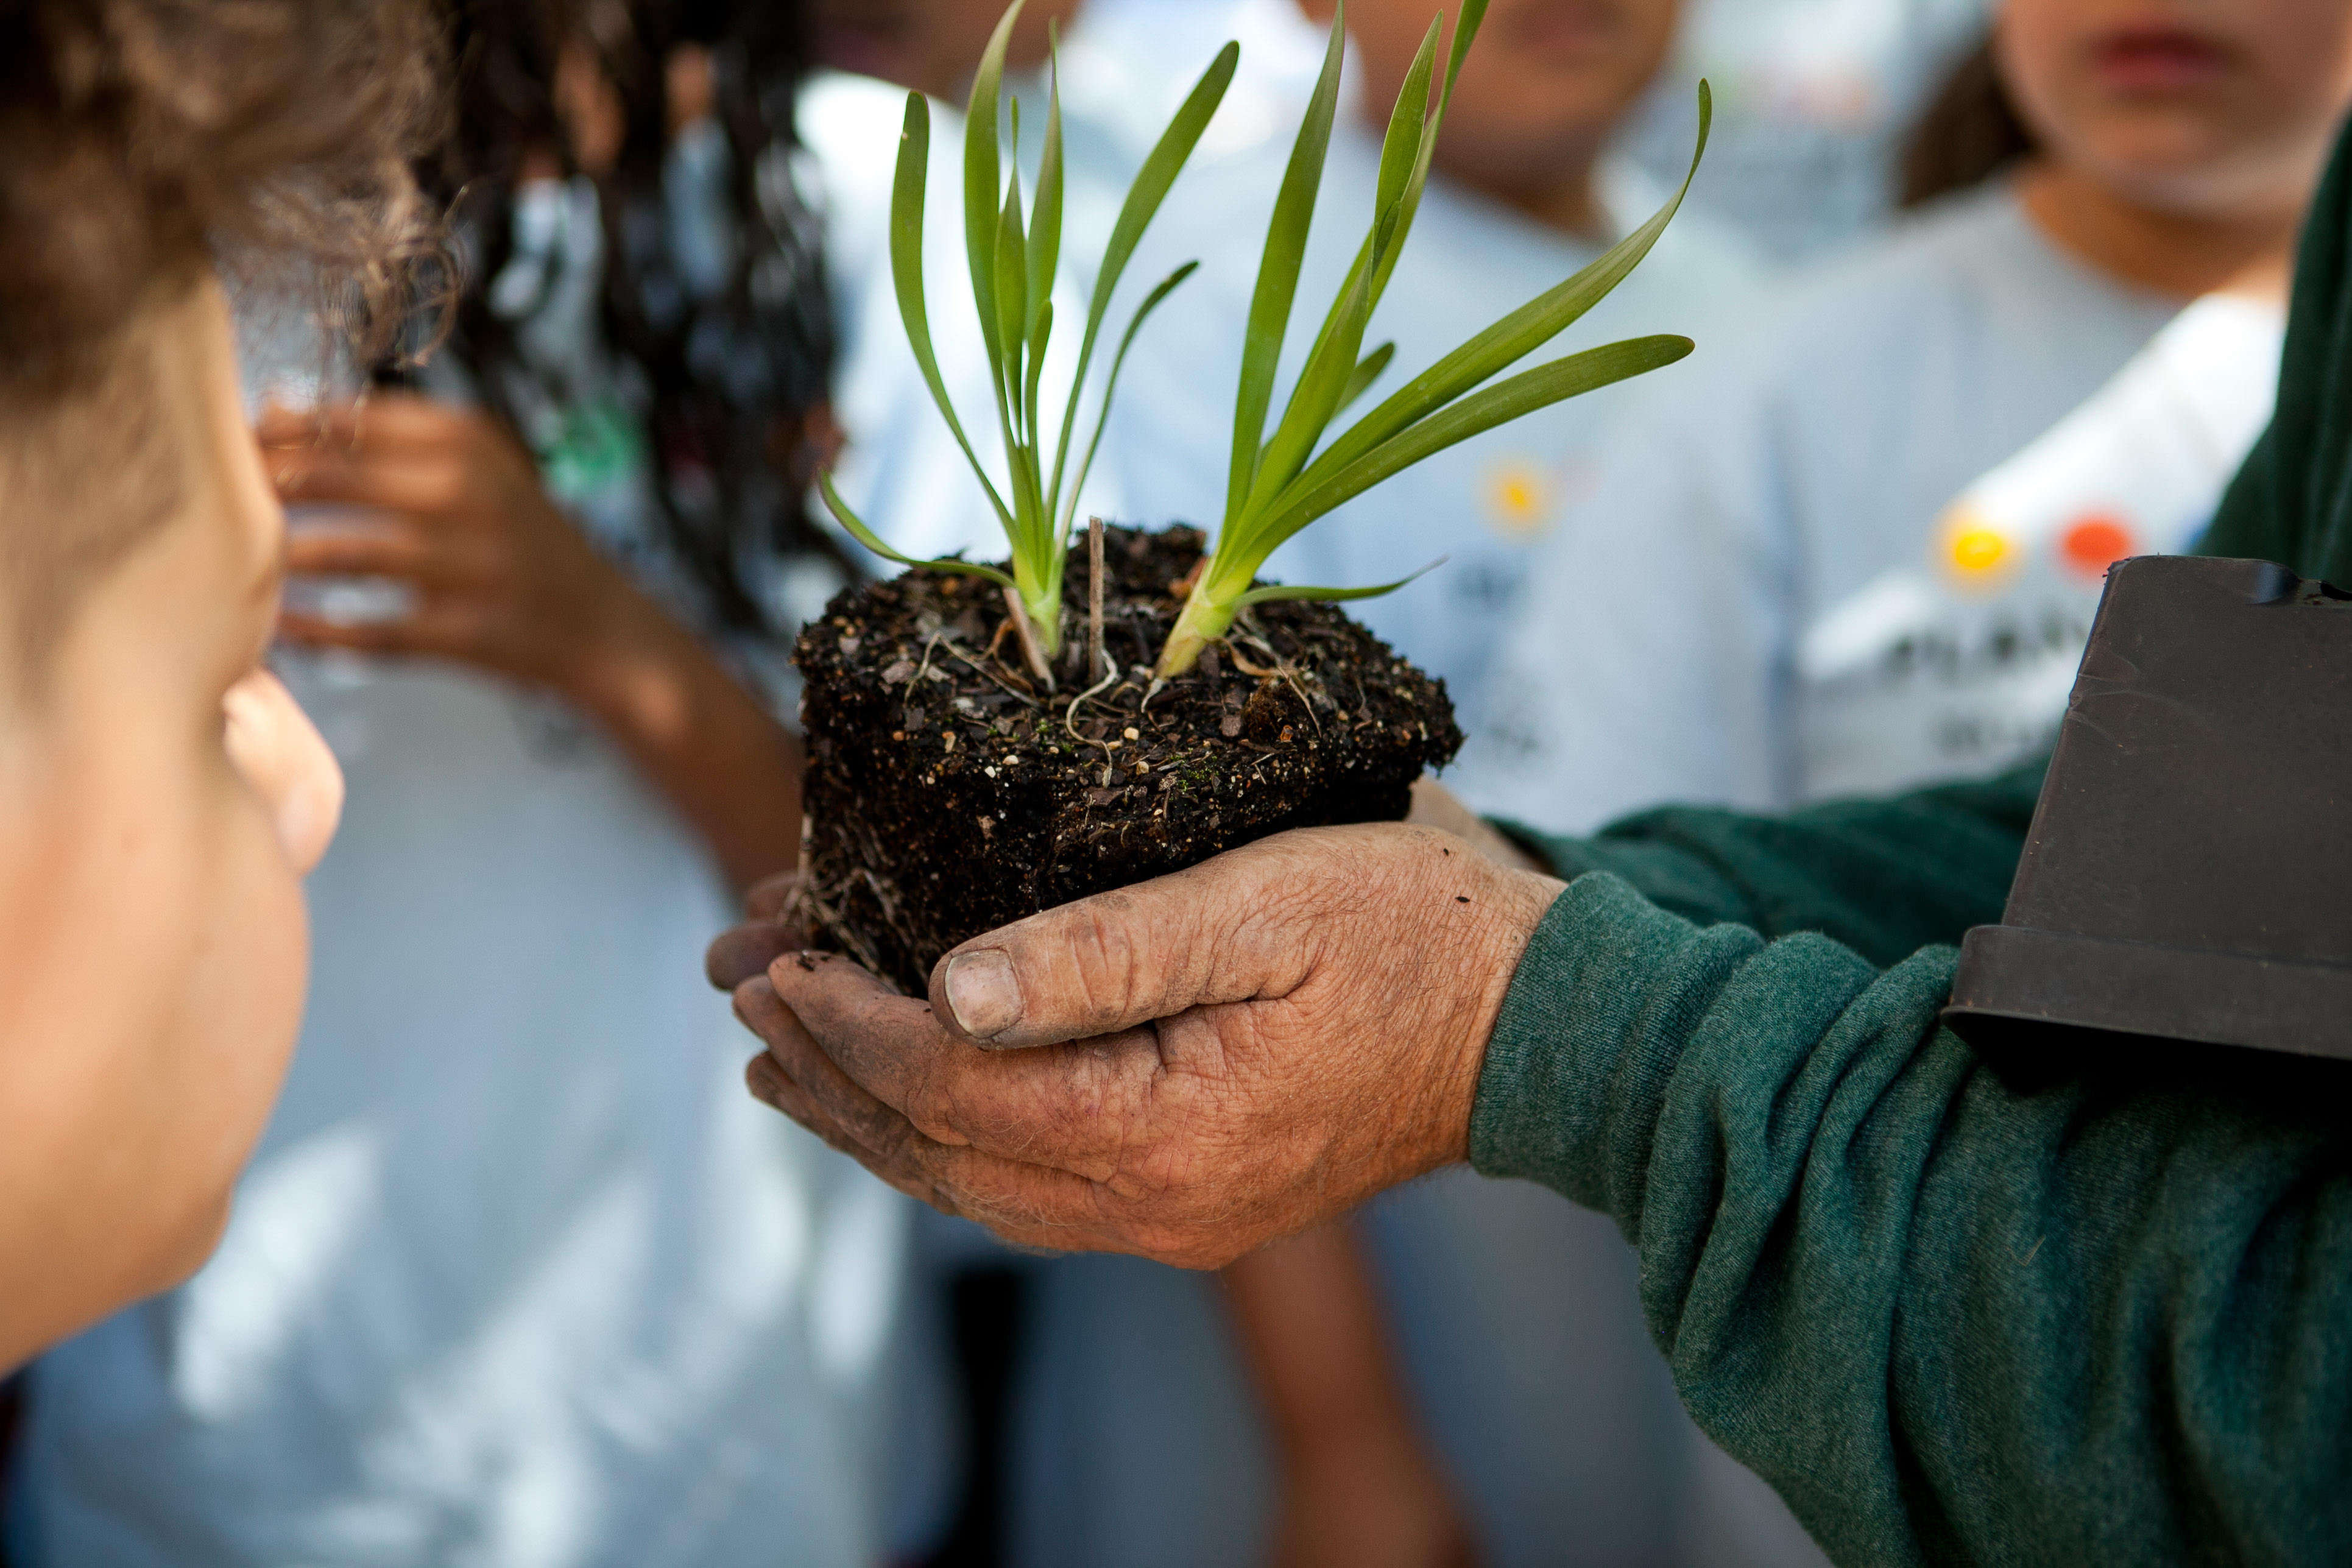 A seedling is held by a volunteer's hands, showing it to the group of children around them. 